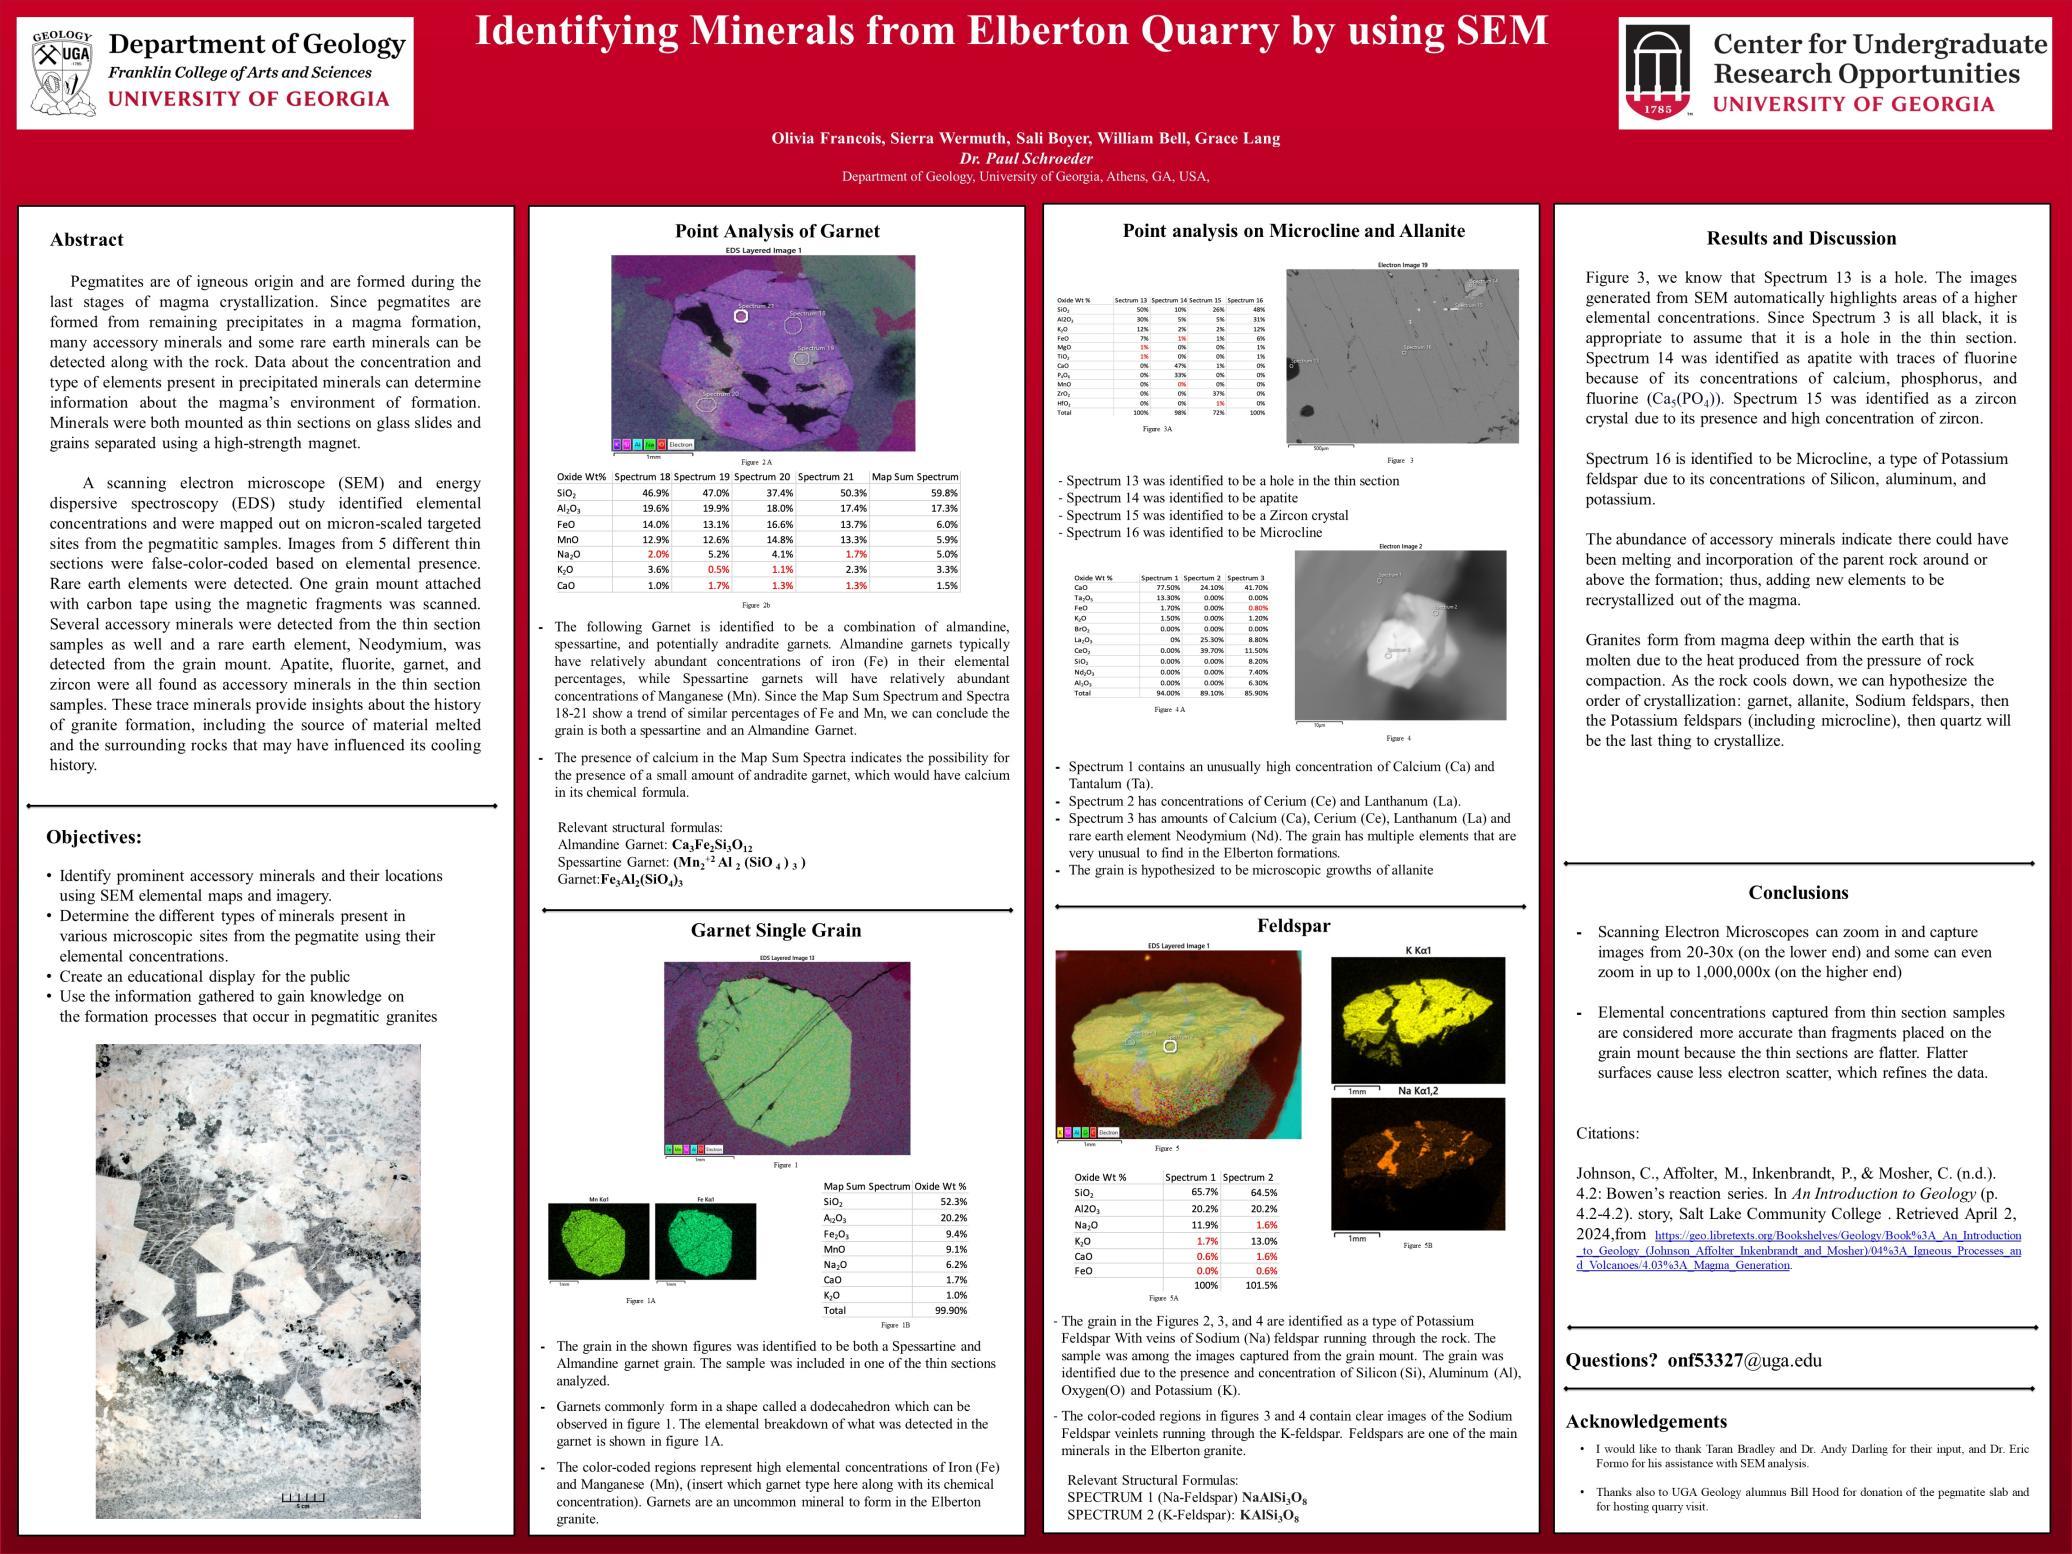 Olivia Francois - Identifying Minerals from Elberton Quarry by using SEM